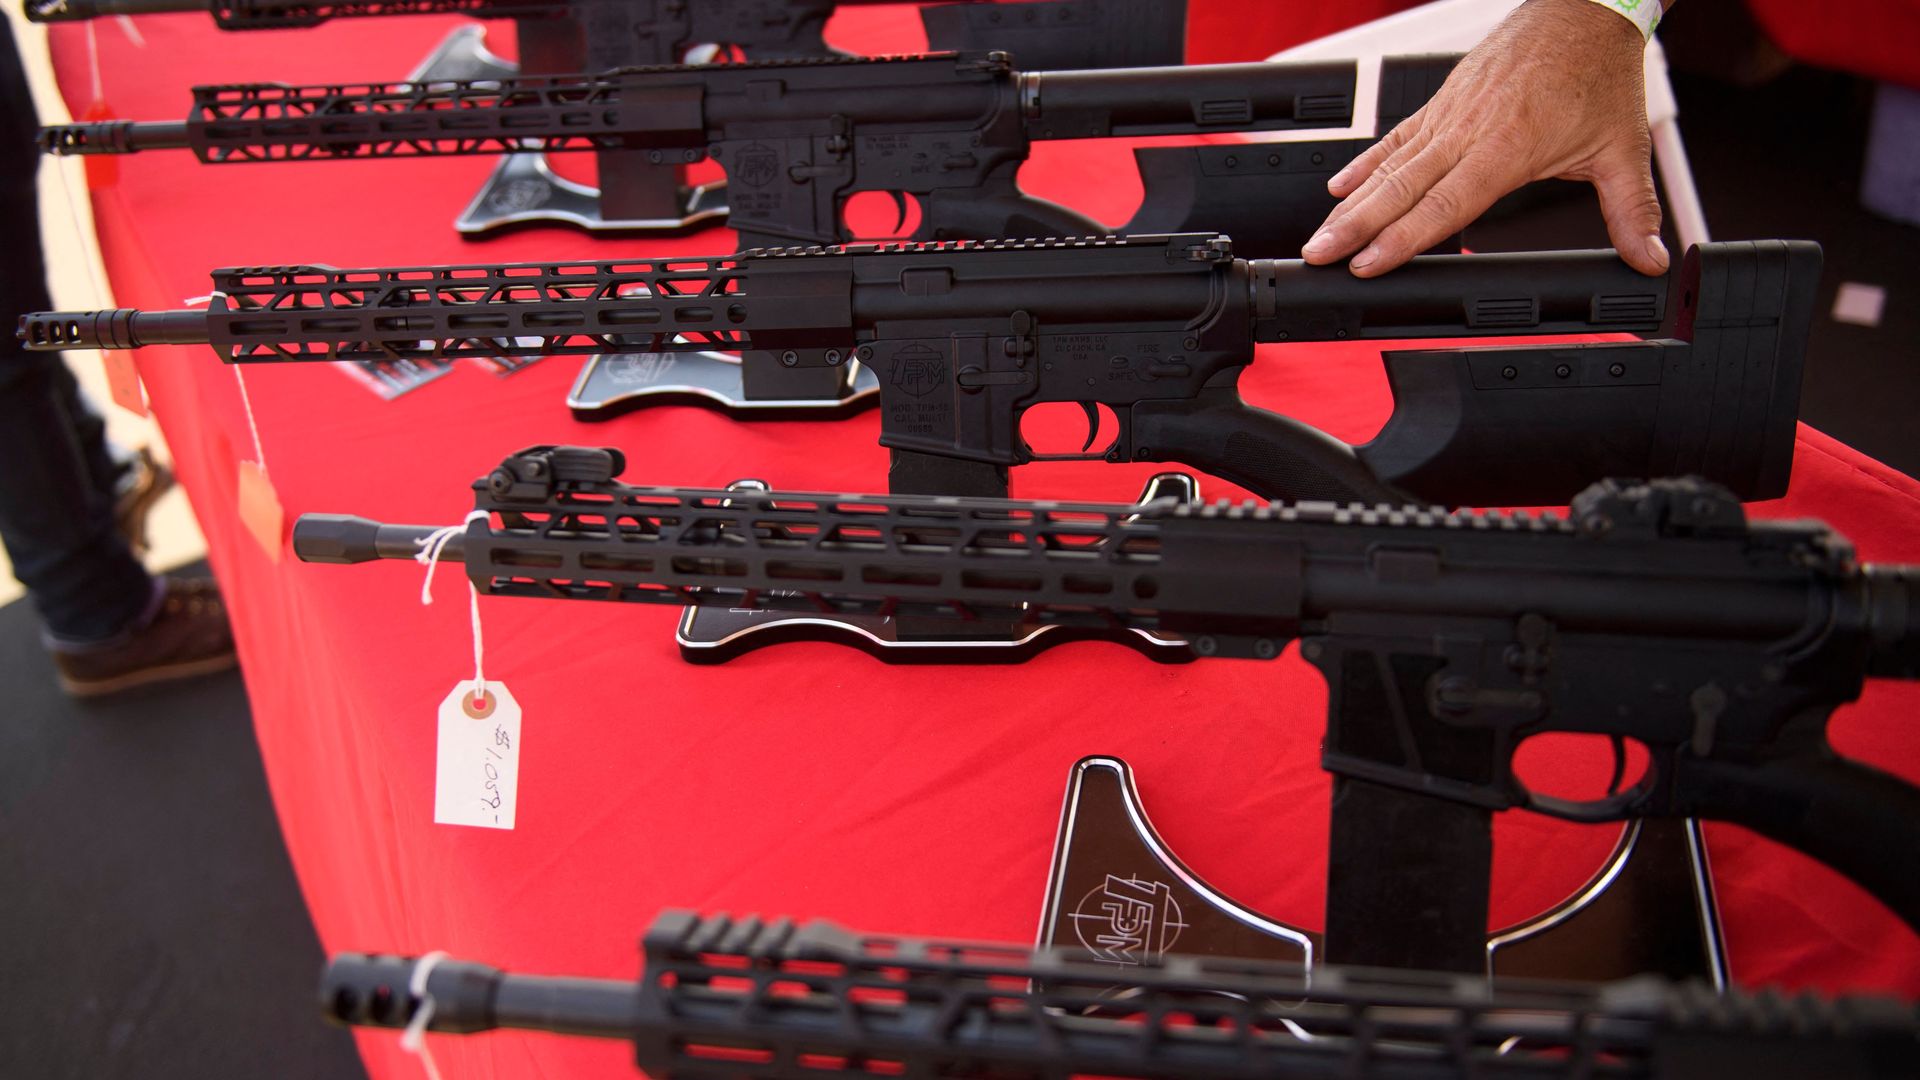 A TPM Arms LLC California-legal featureless AR-15 style rifle is displayed at the Crossroads of the West Gun Show at the Orange County Fairgrounds on June 5, 2021 in Costa Mesa, California. 